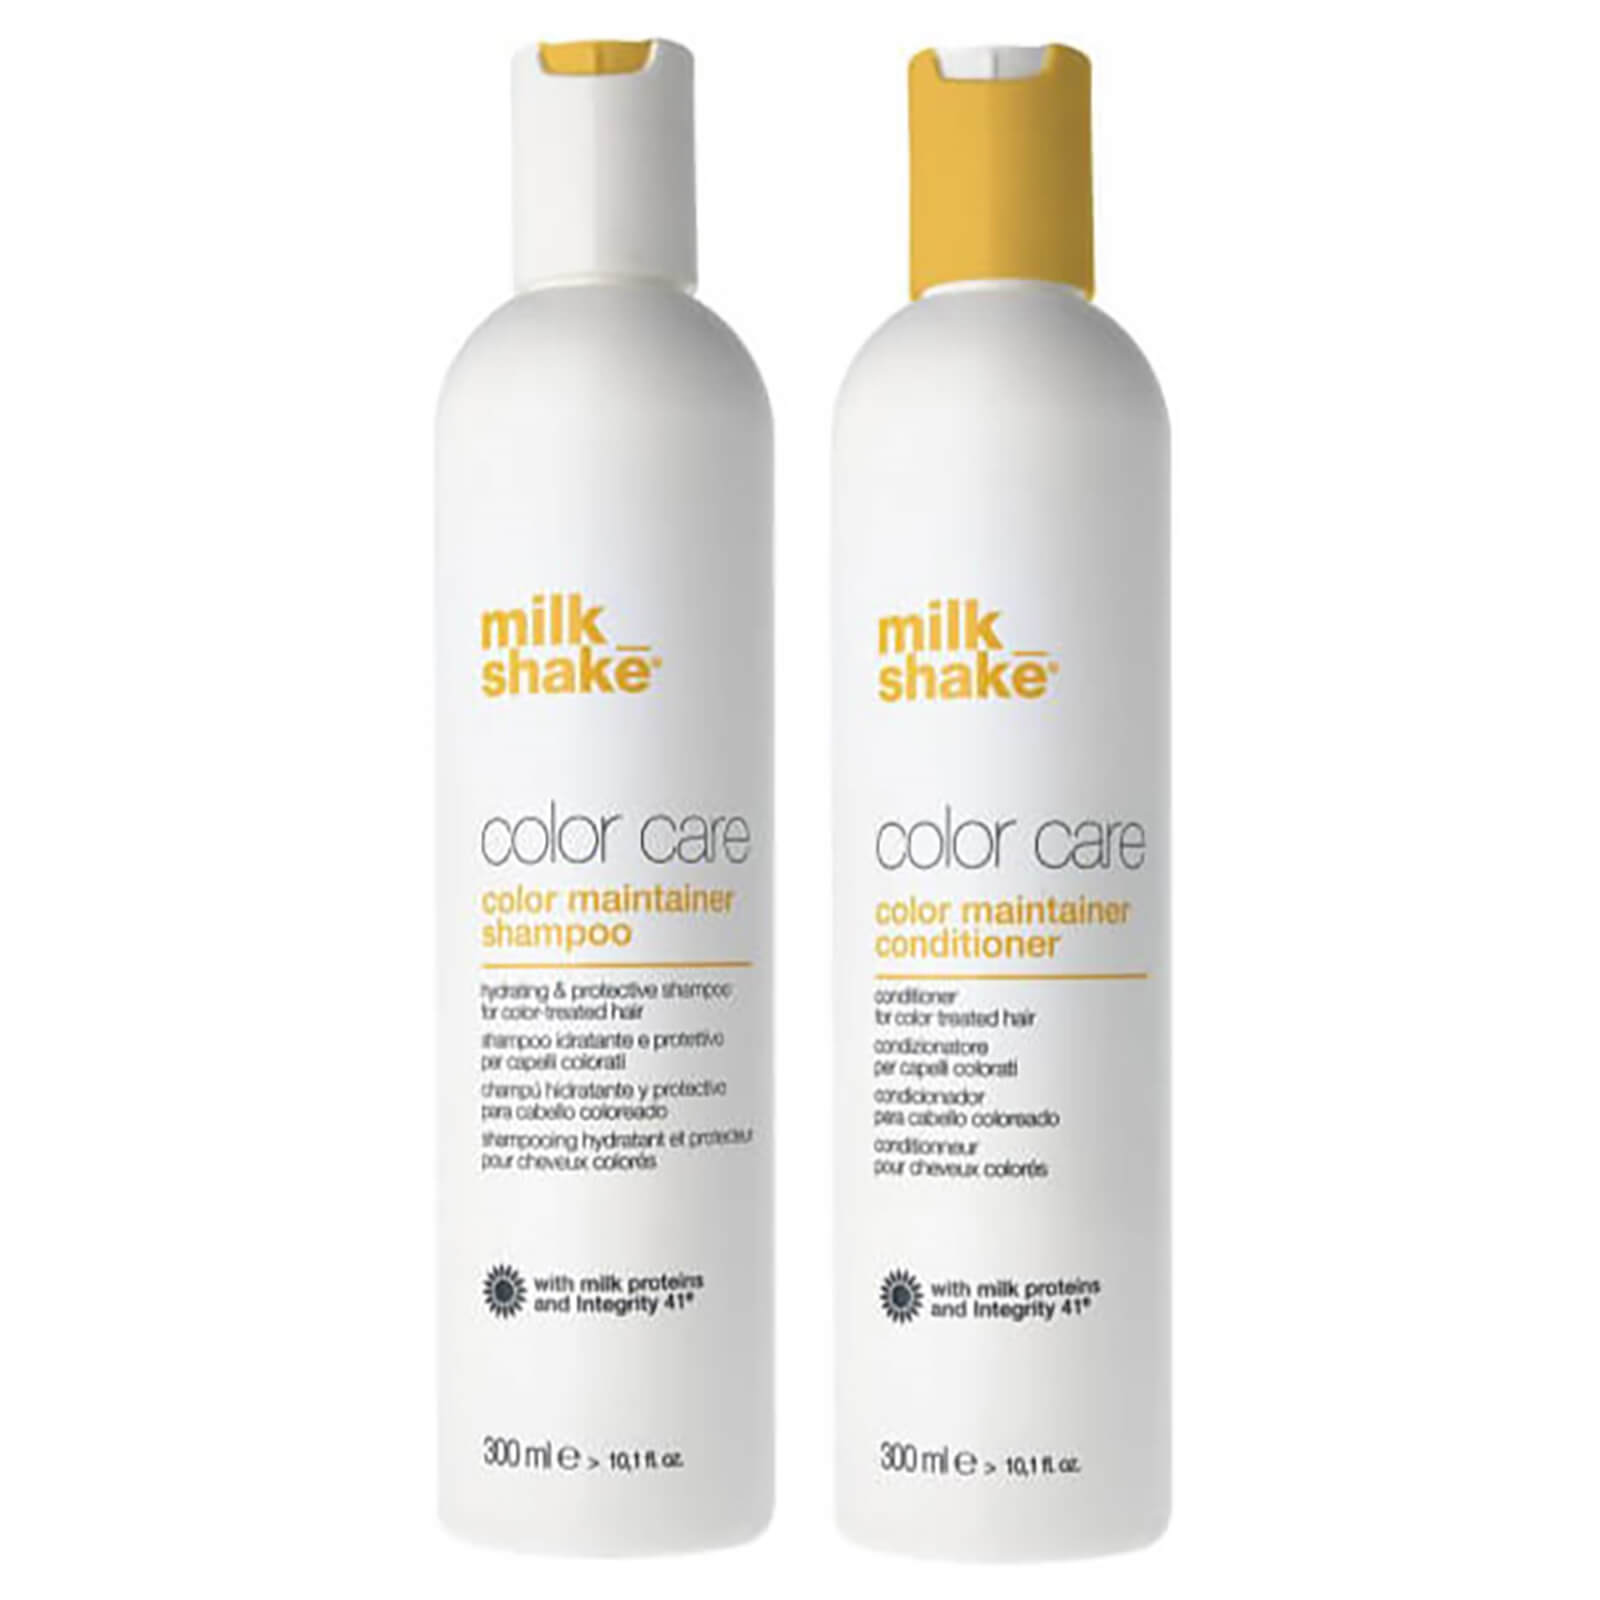 milk_shake Colour Care Maintainer Shampoo and Conditioner Duo product